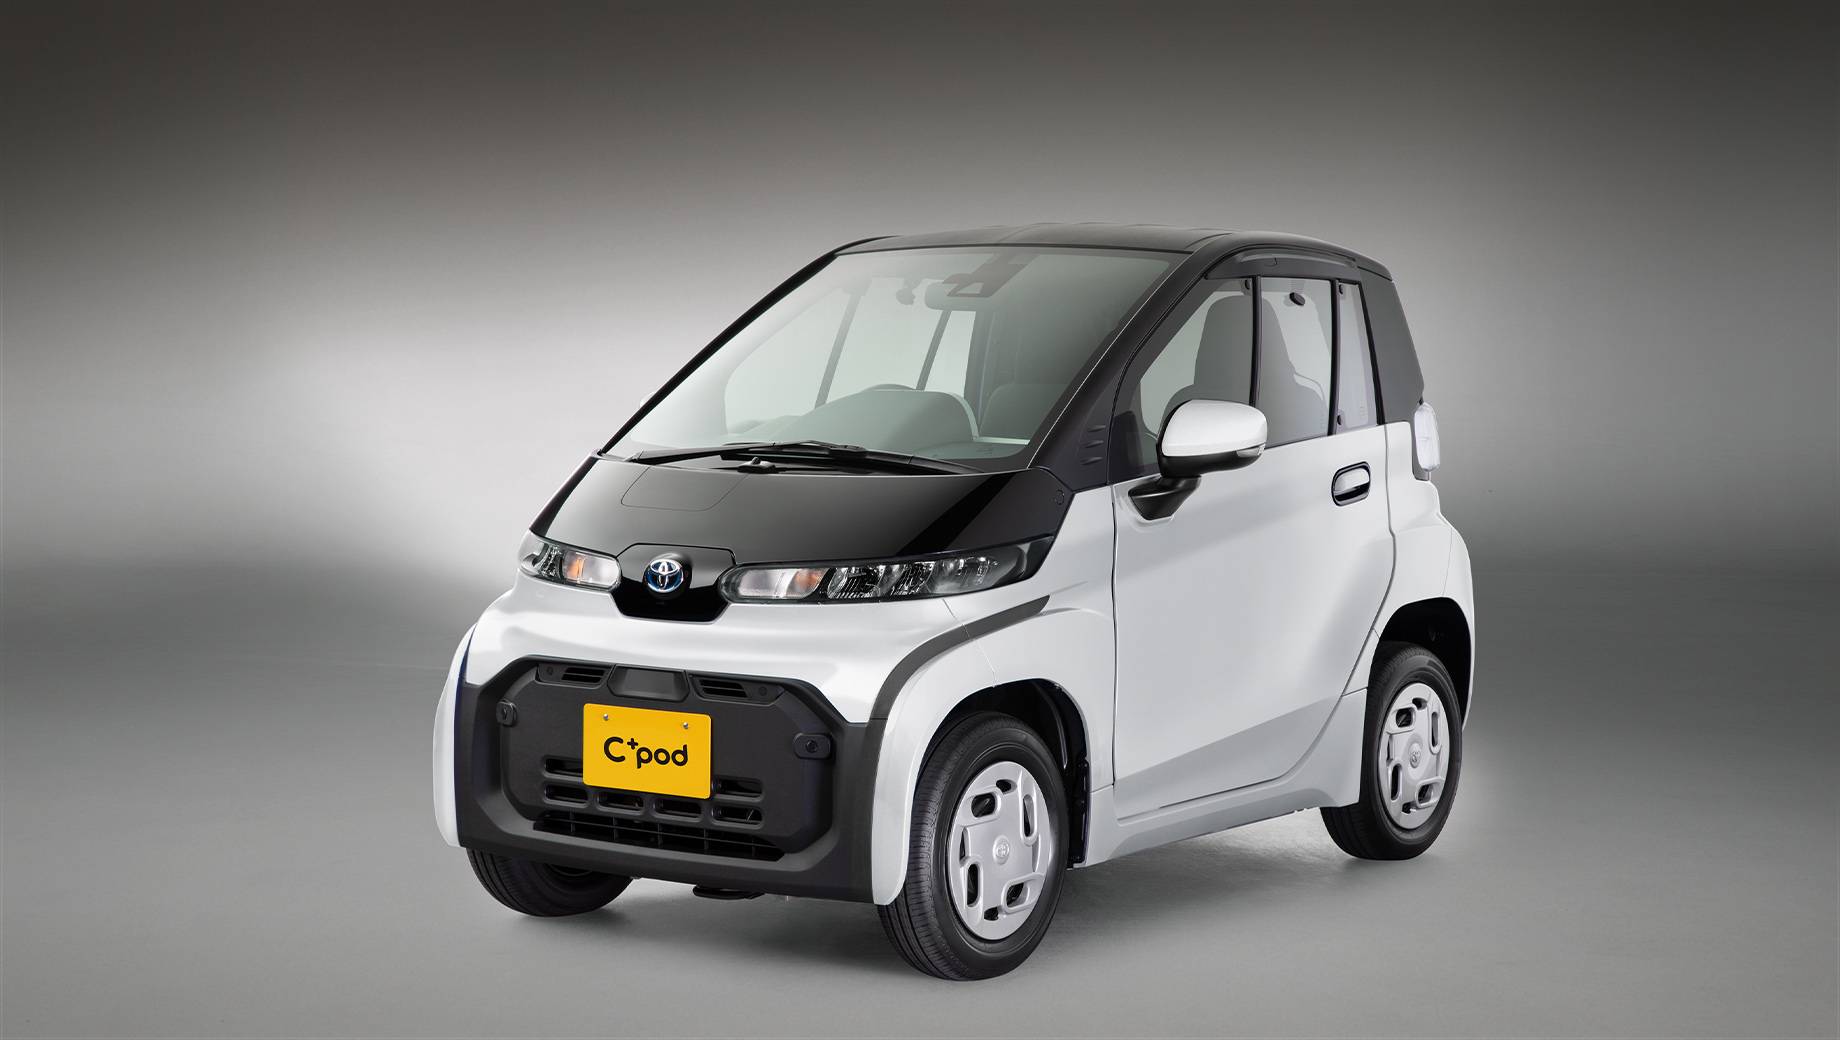 Toyota launches "c+pod" ultra-compact battery electric vehicle in japan | toyota | global newsroom | toyota motor corporation official global website